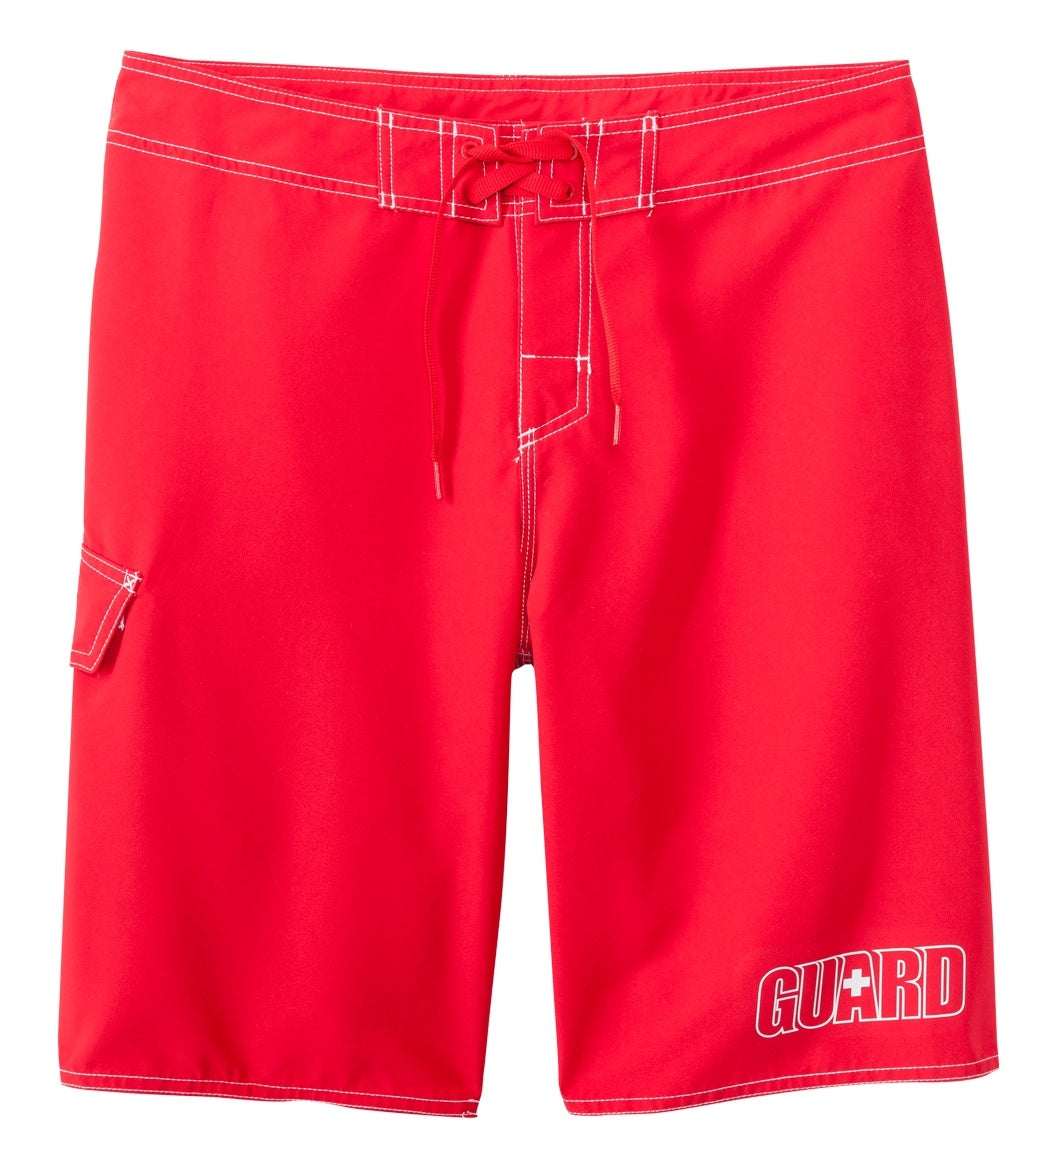 Dolfin Guard Fitted Board Short Swimsuit - Red 40 Polyester - Swimoutlet.com